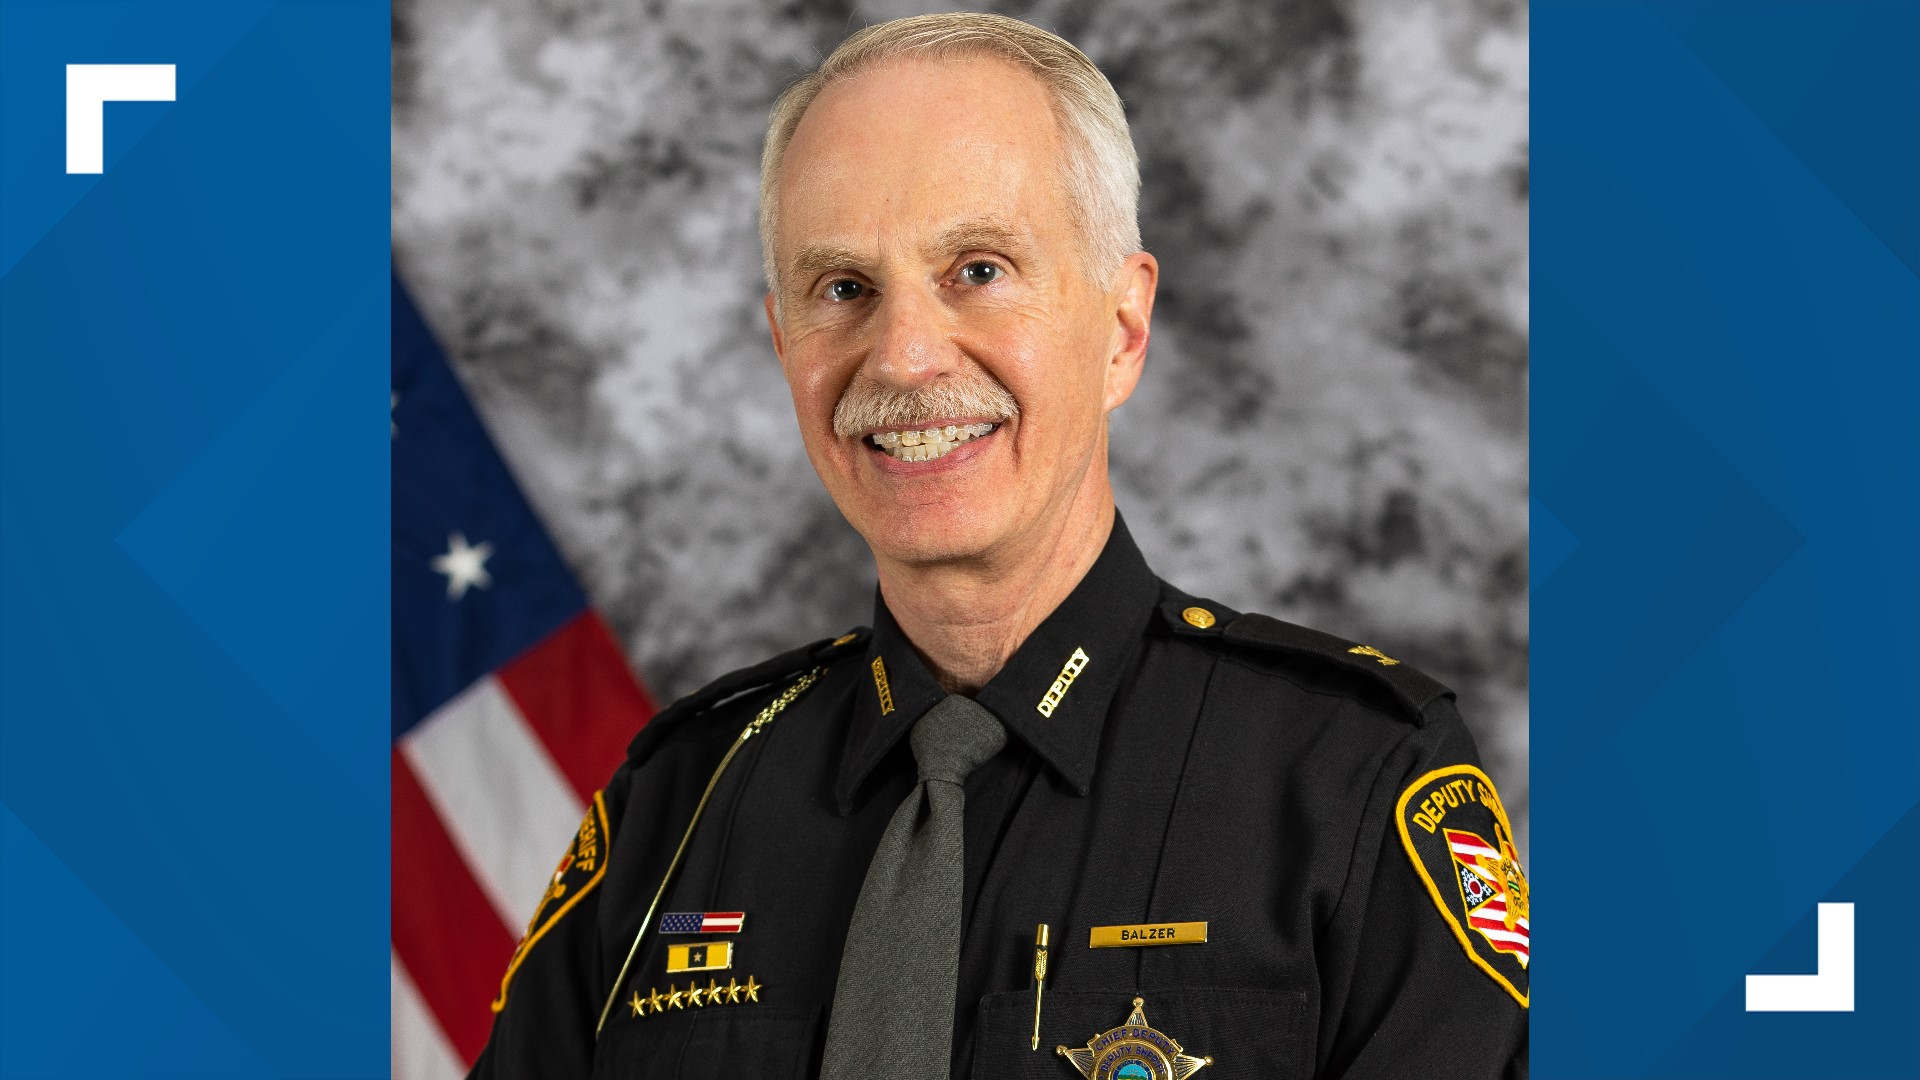 Jeffrey Balzer, who has 38 years of law enforcement experience, was appointed as acting sheriff in April.